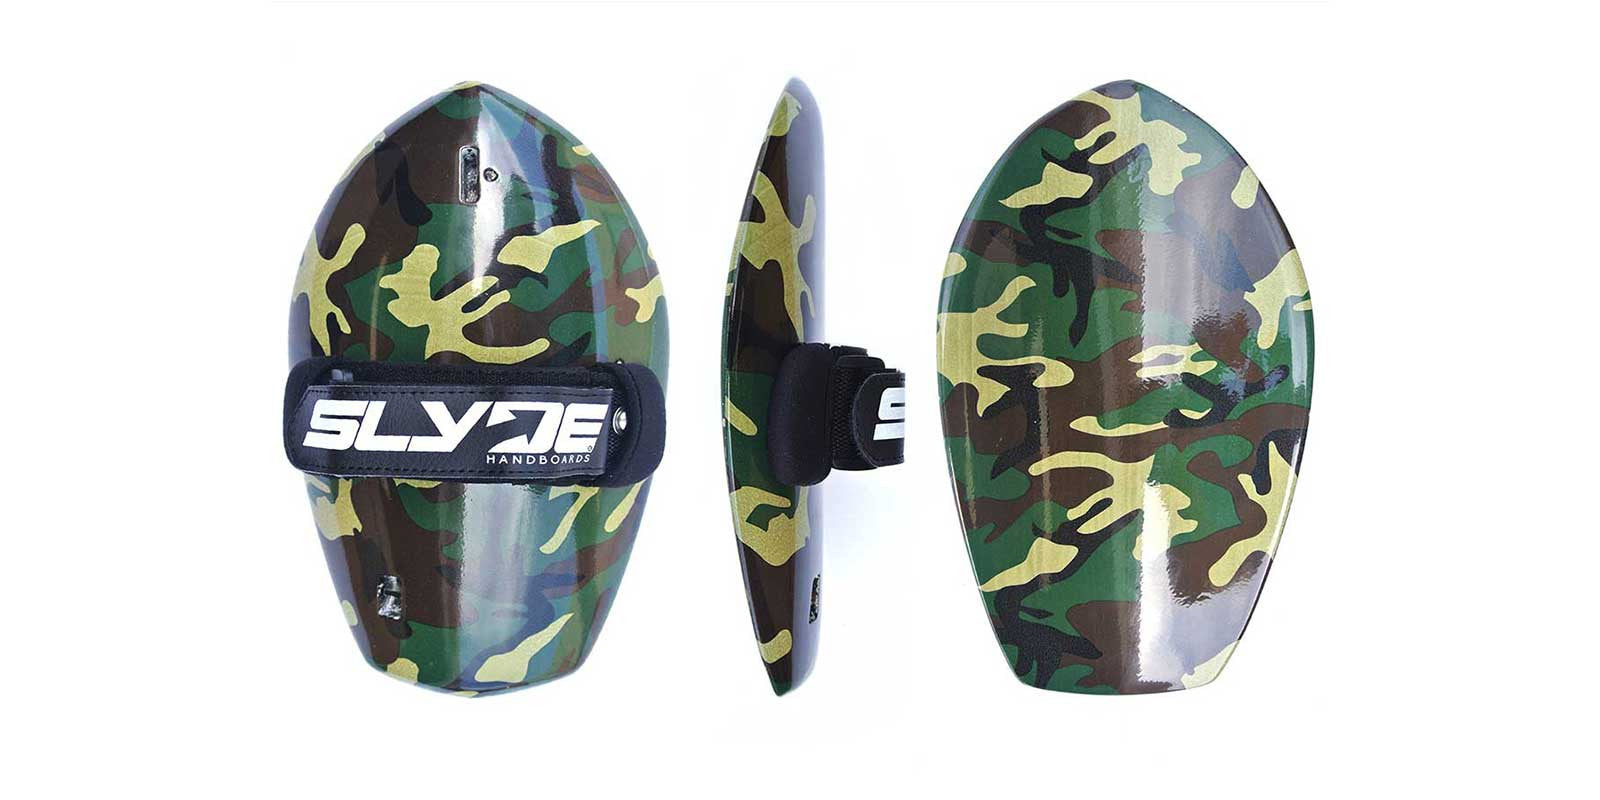 Custom Slyde Bula Handboards: Designed To Stand Out From The Crowd